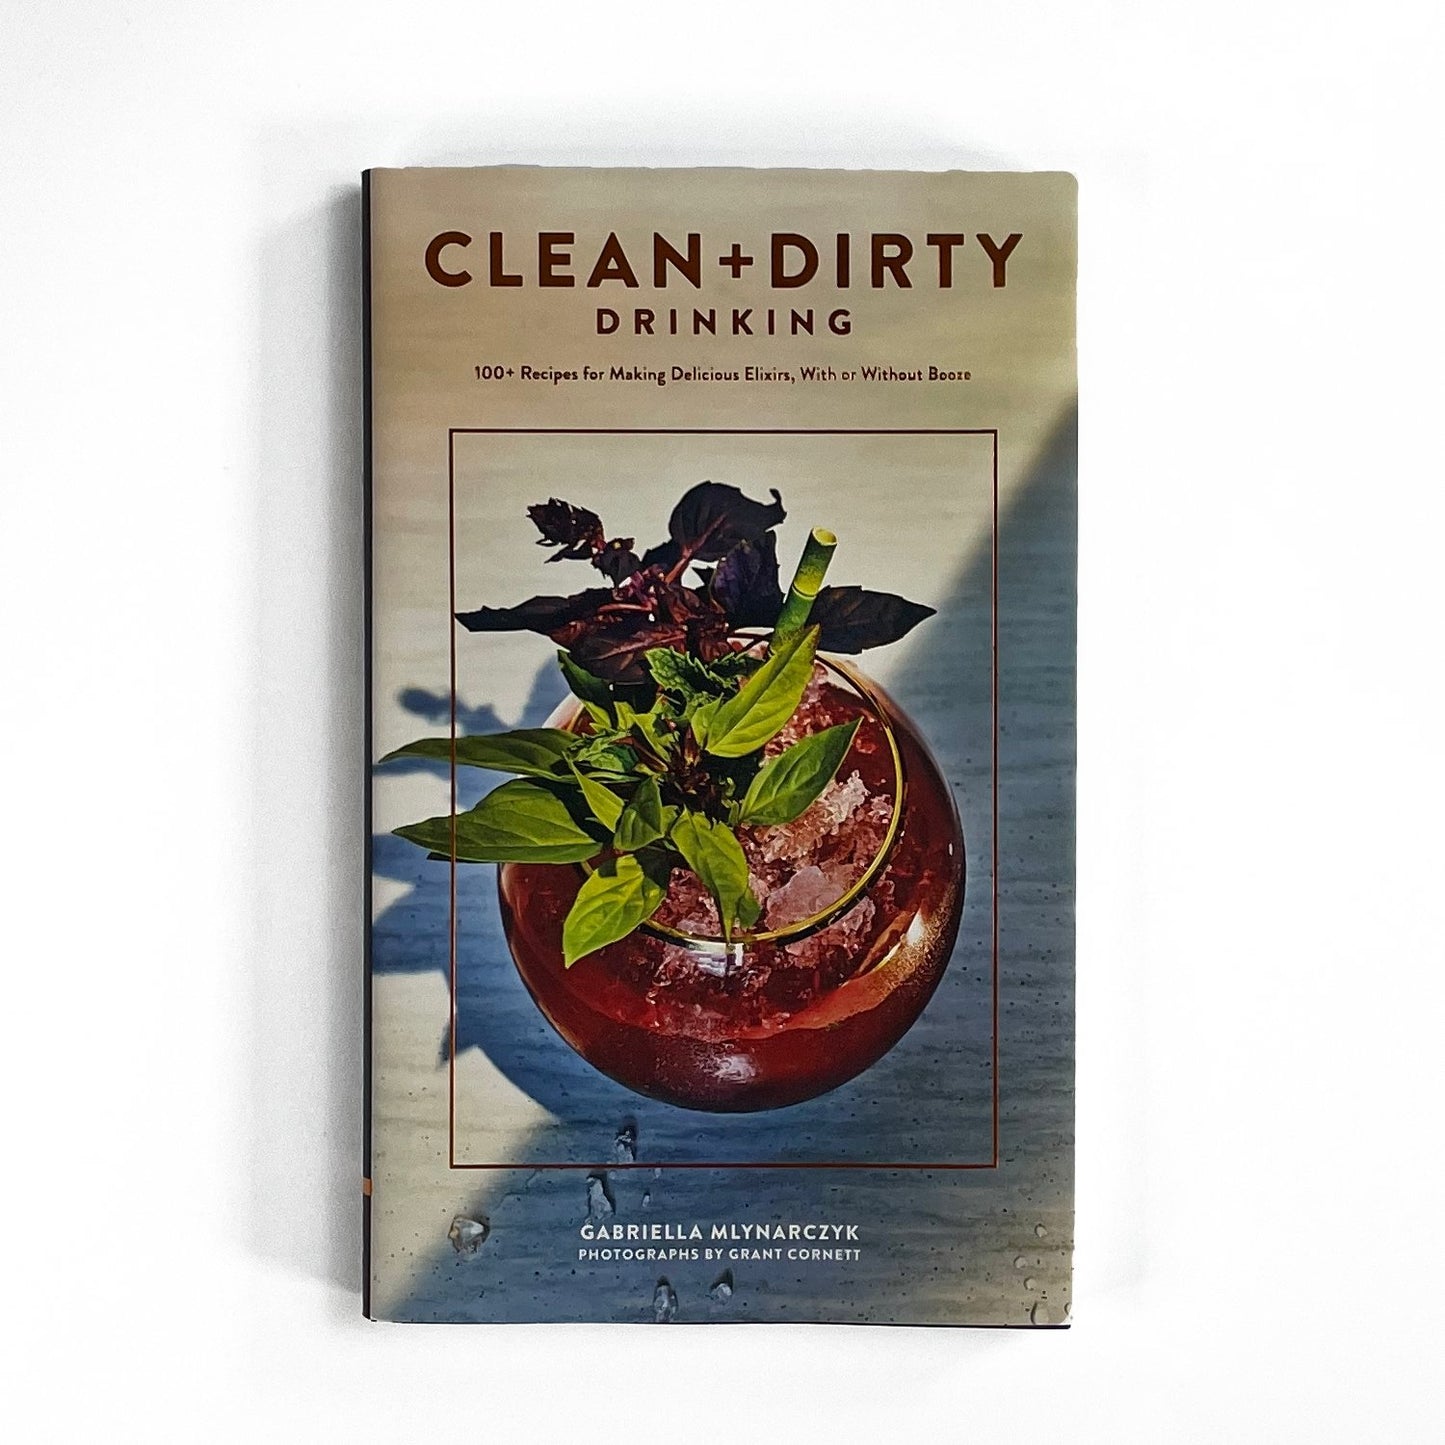 Clean and dirty drinking recipe book on a white background